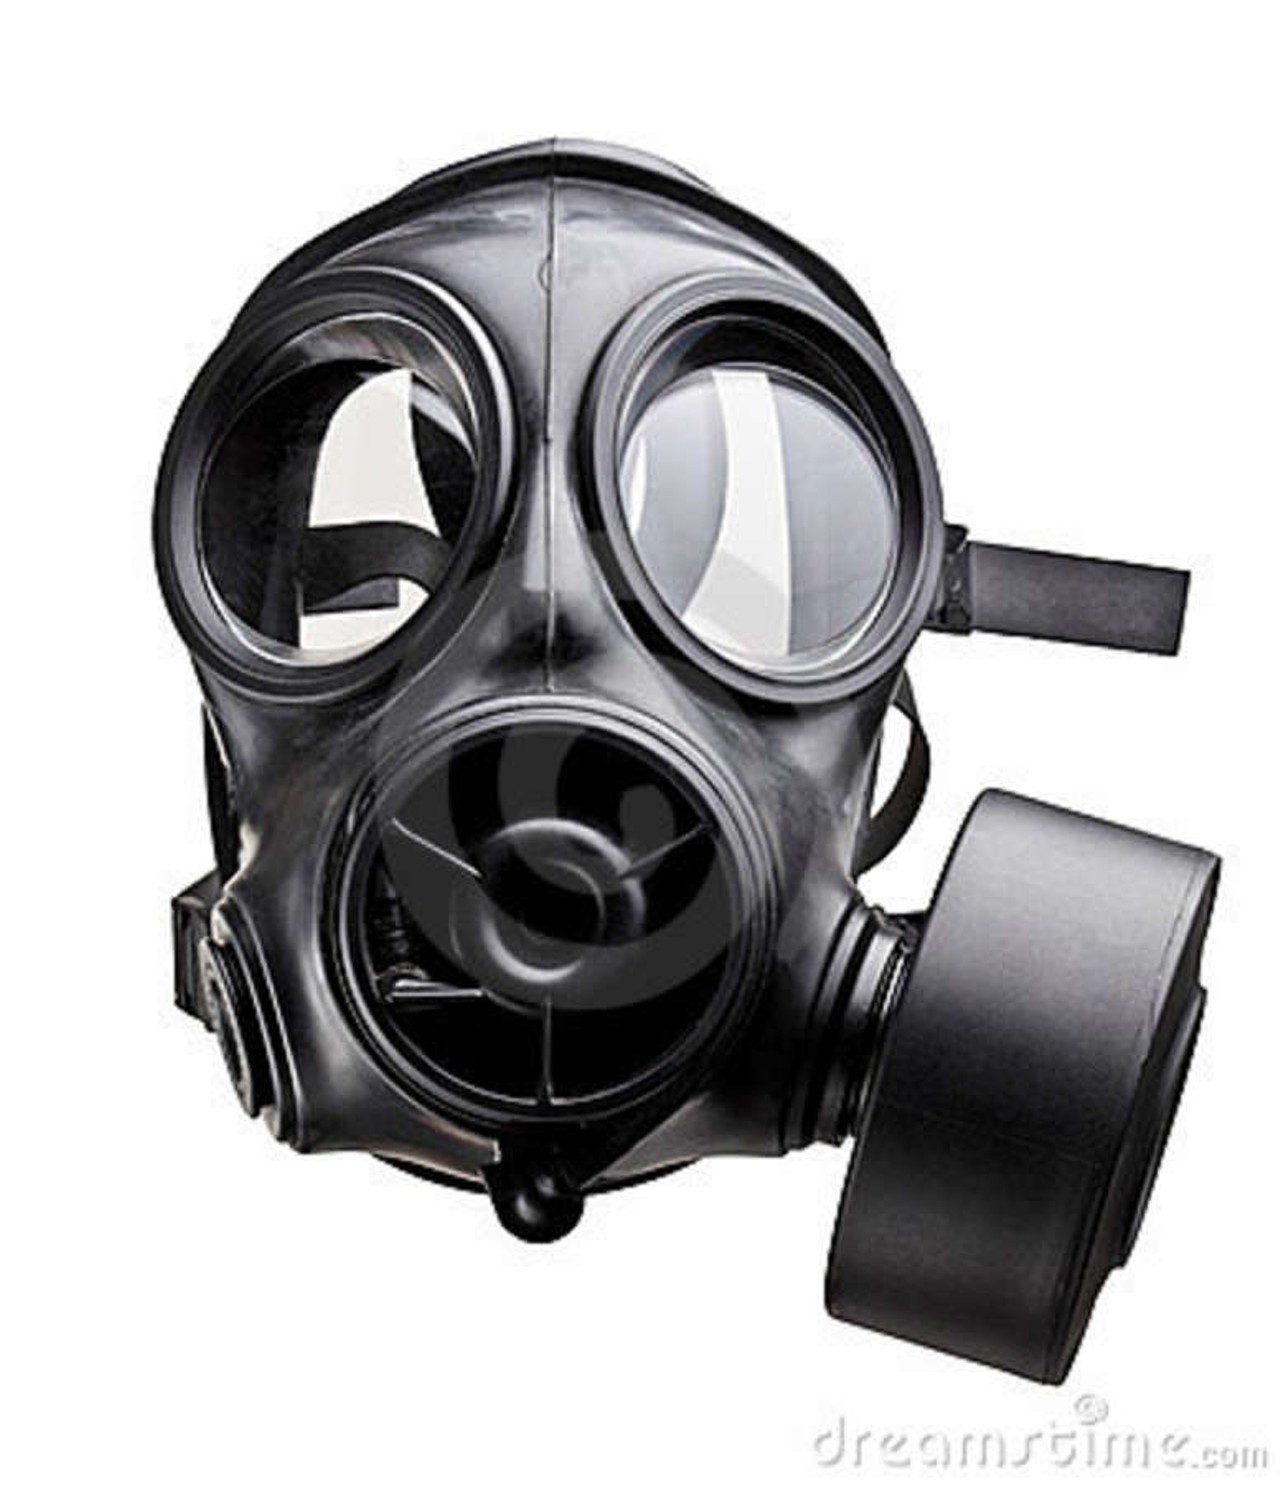 Garrett Morgan knew that having a gas mask could come in handy in deadly situations when he invented the... gas mask.